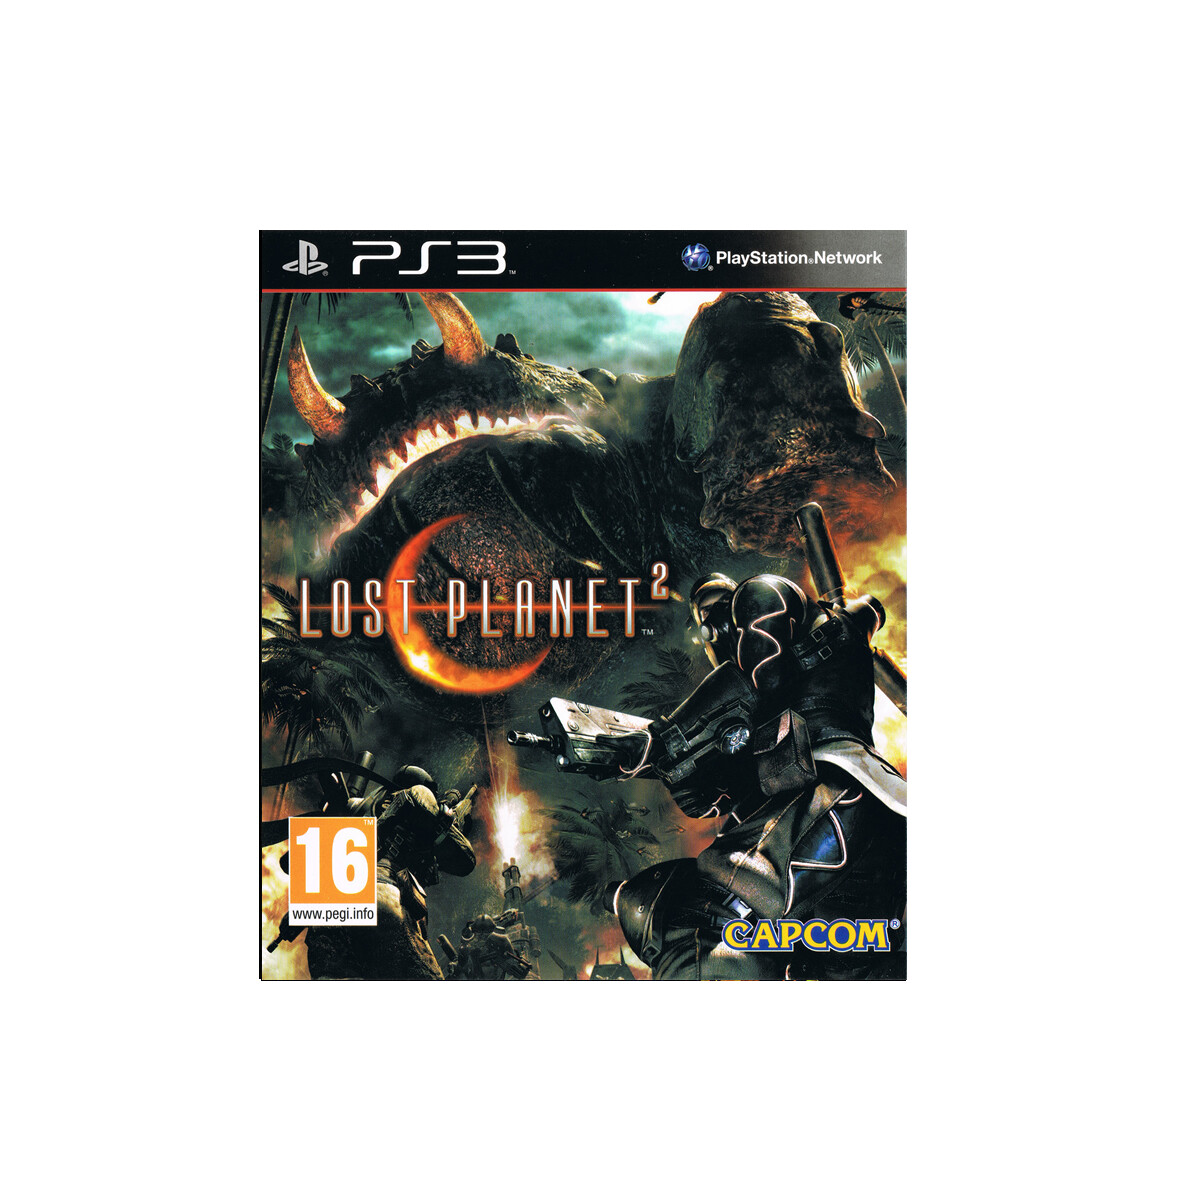 PS3 LOST PLANET 2 